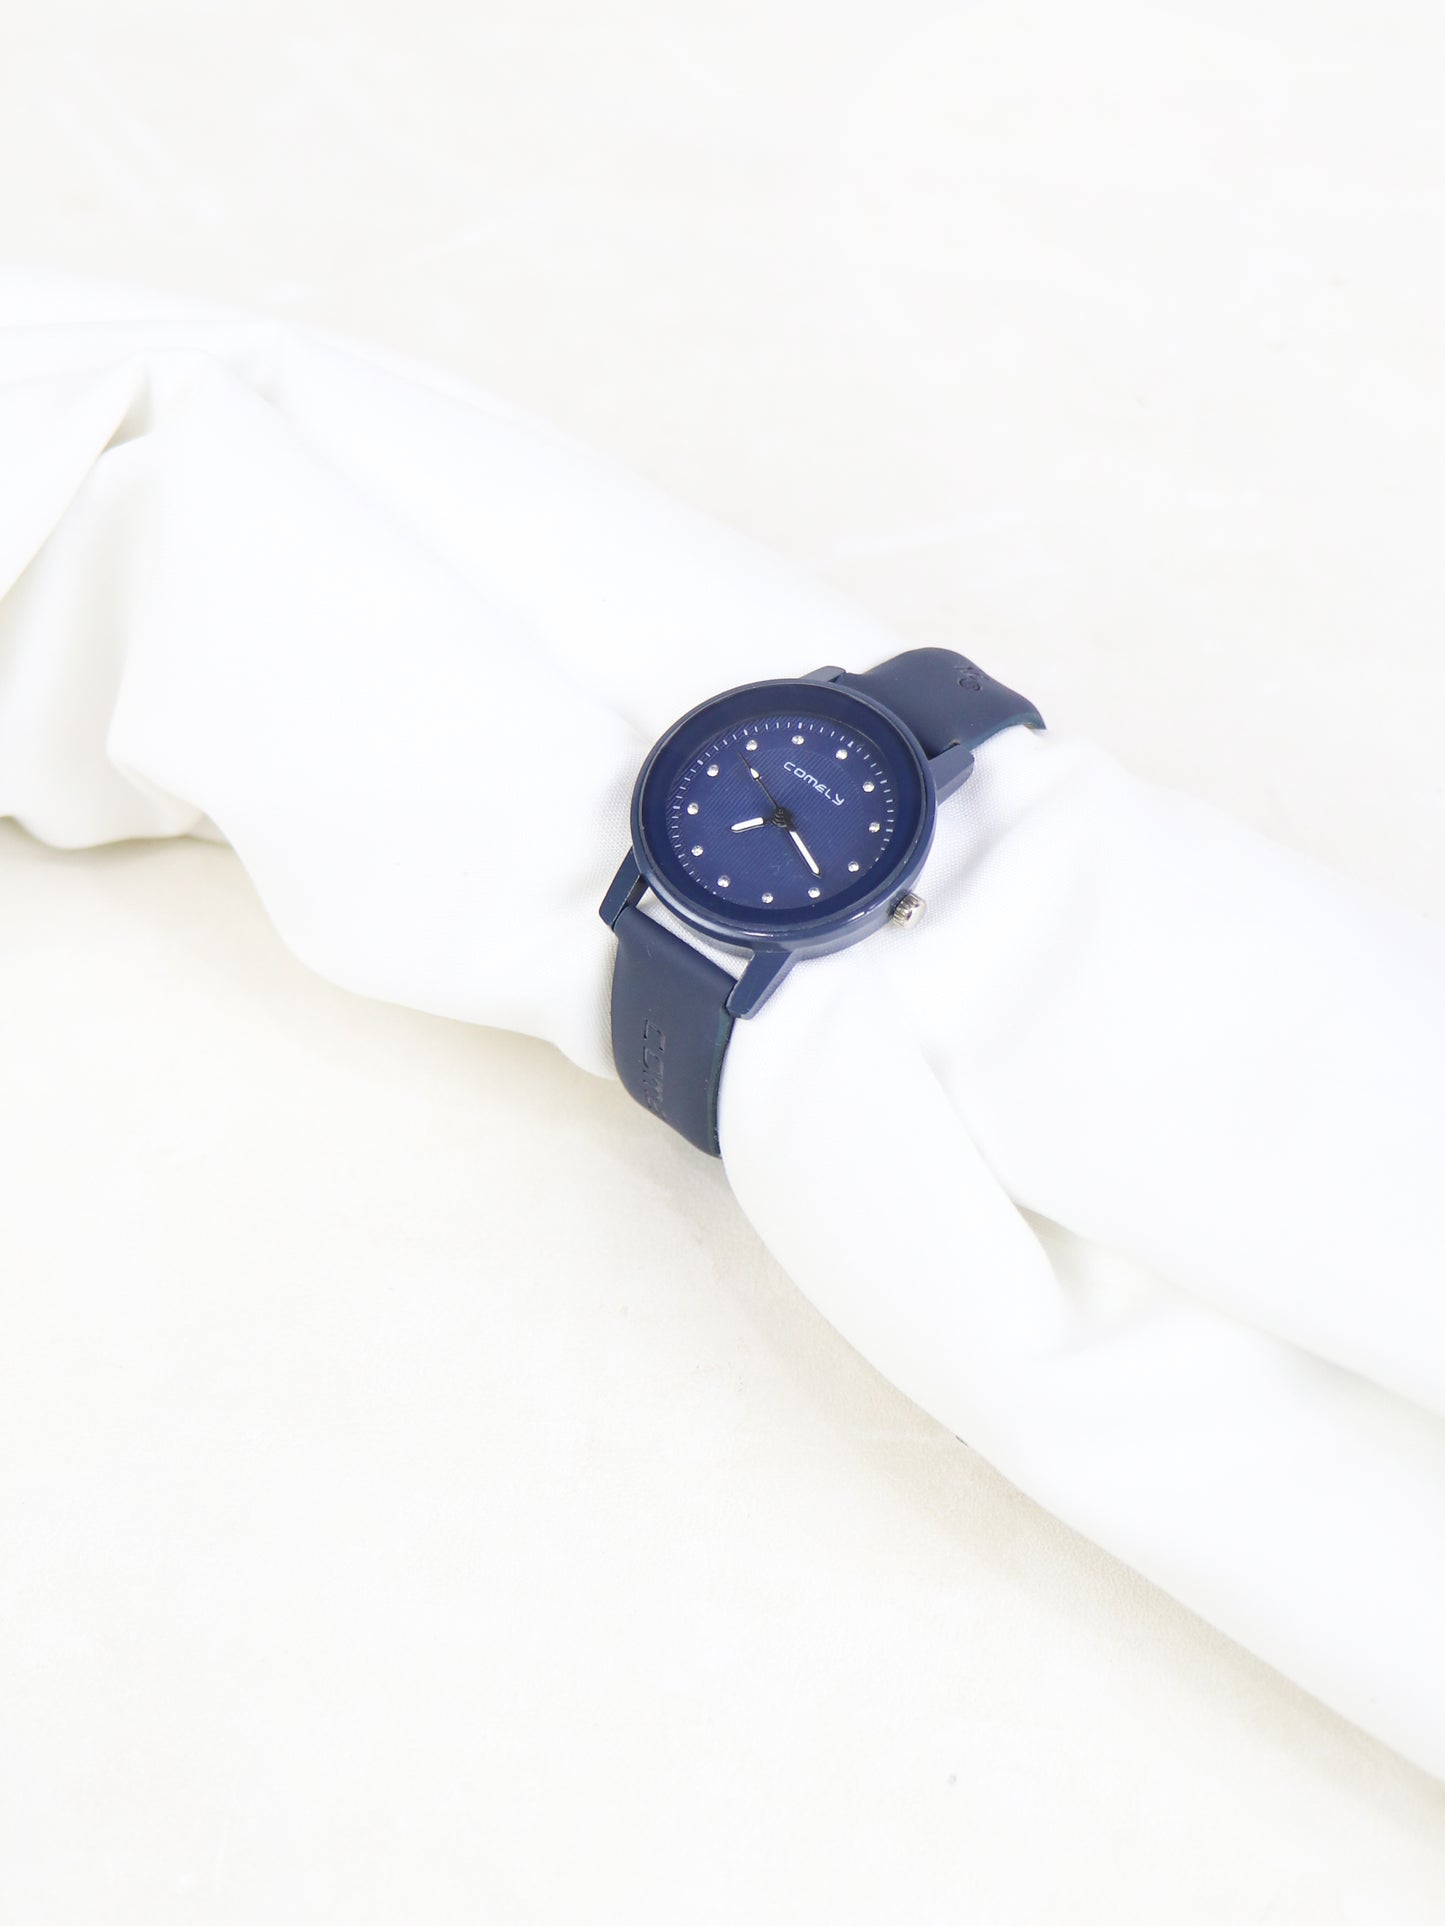 Comely Stylish Wrist Watch for Women Blue